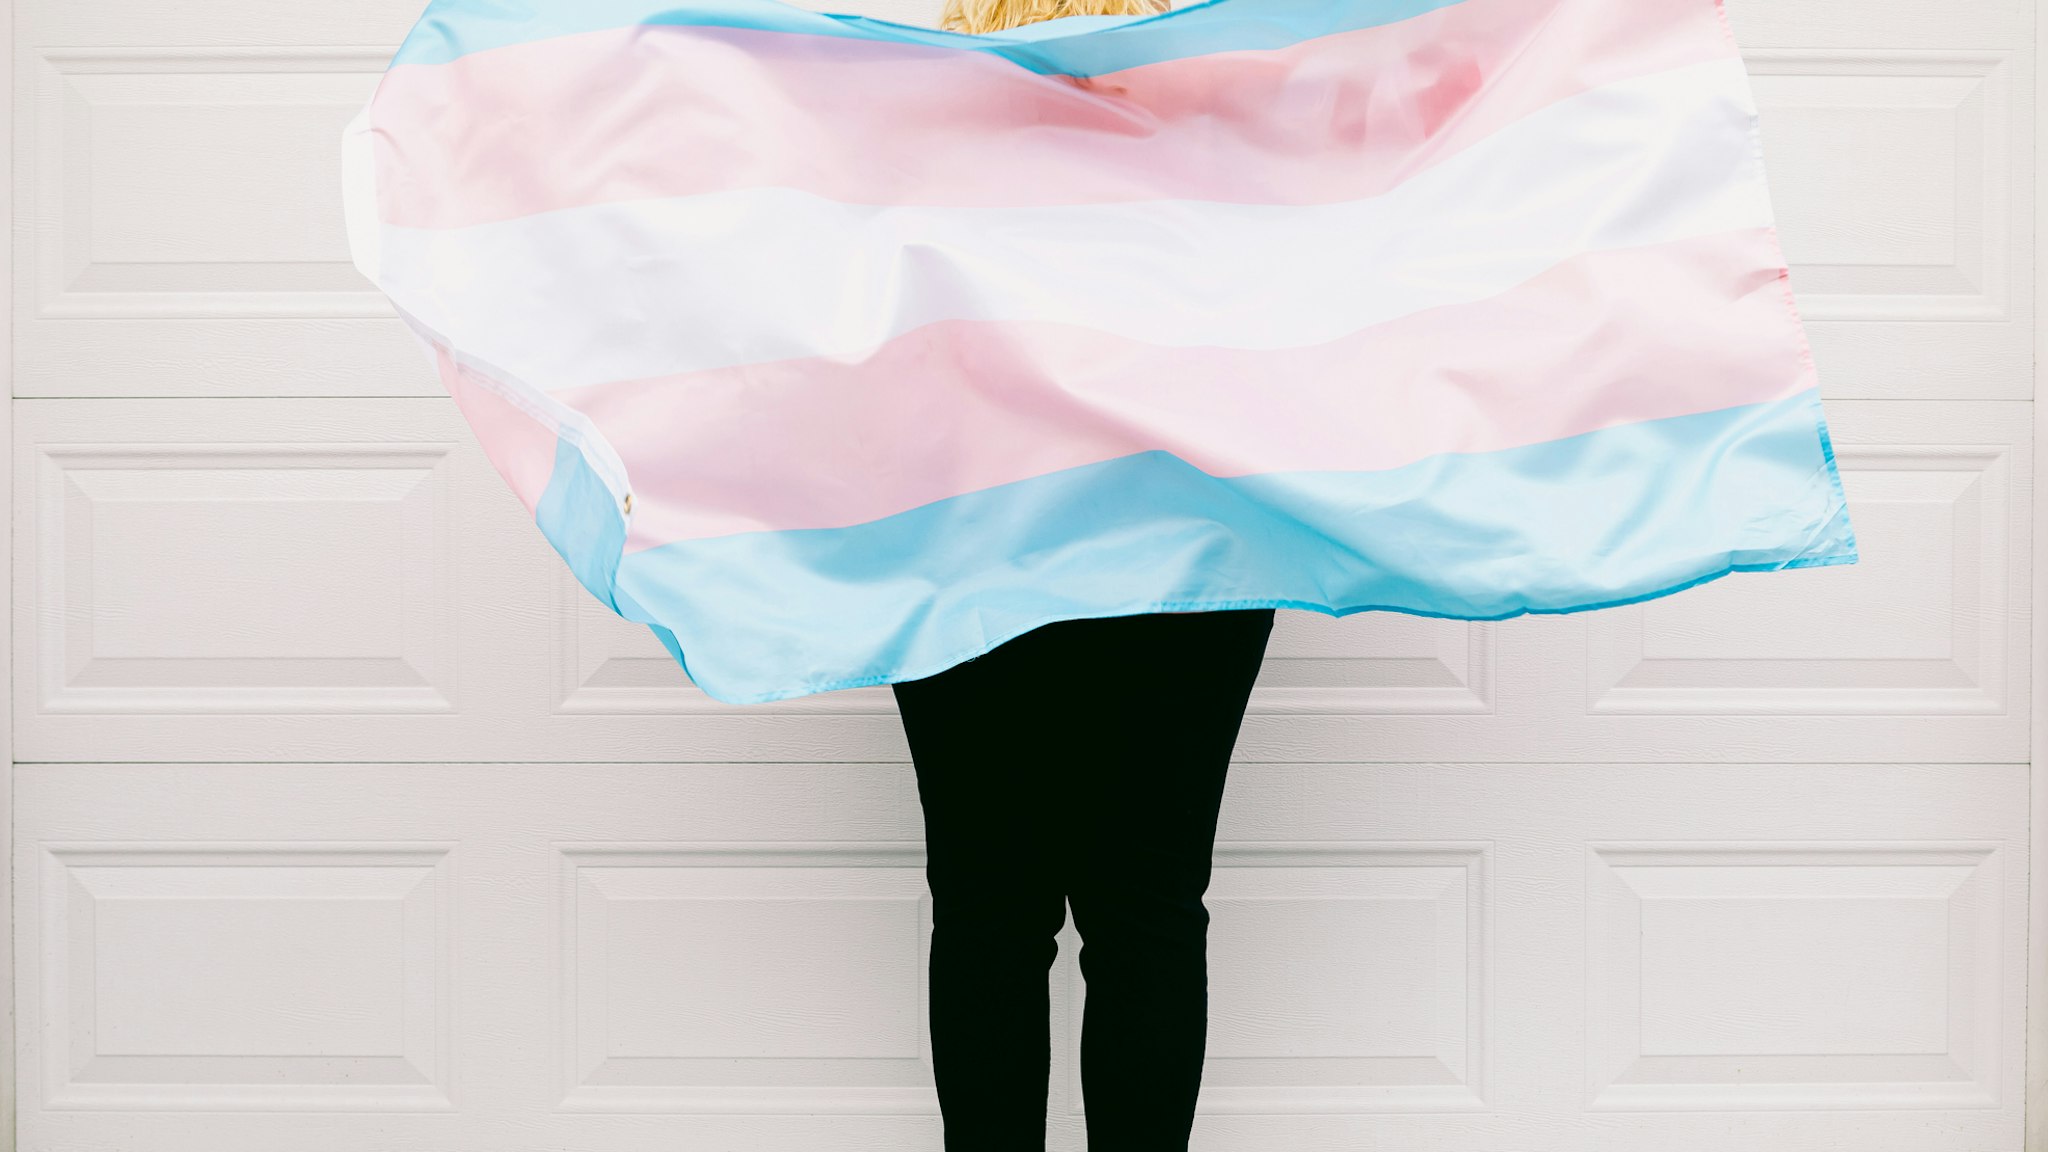 Transgender person from behind, wearing pink and white striped sweatshirt, holds transgender flag - stock photo